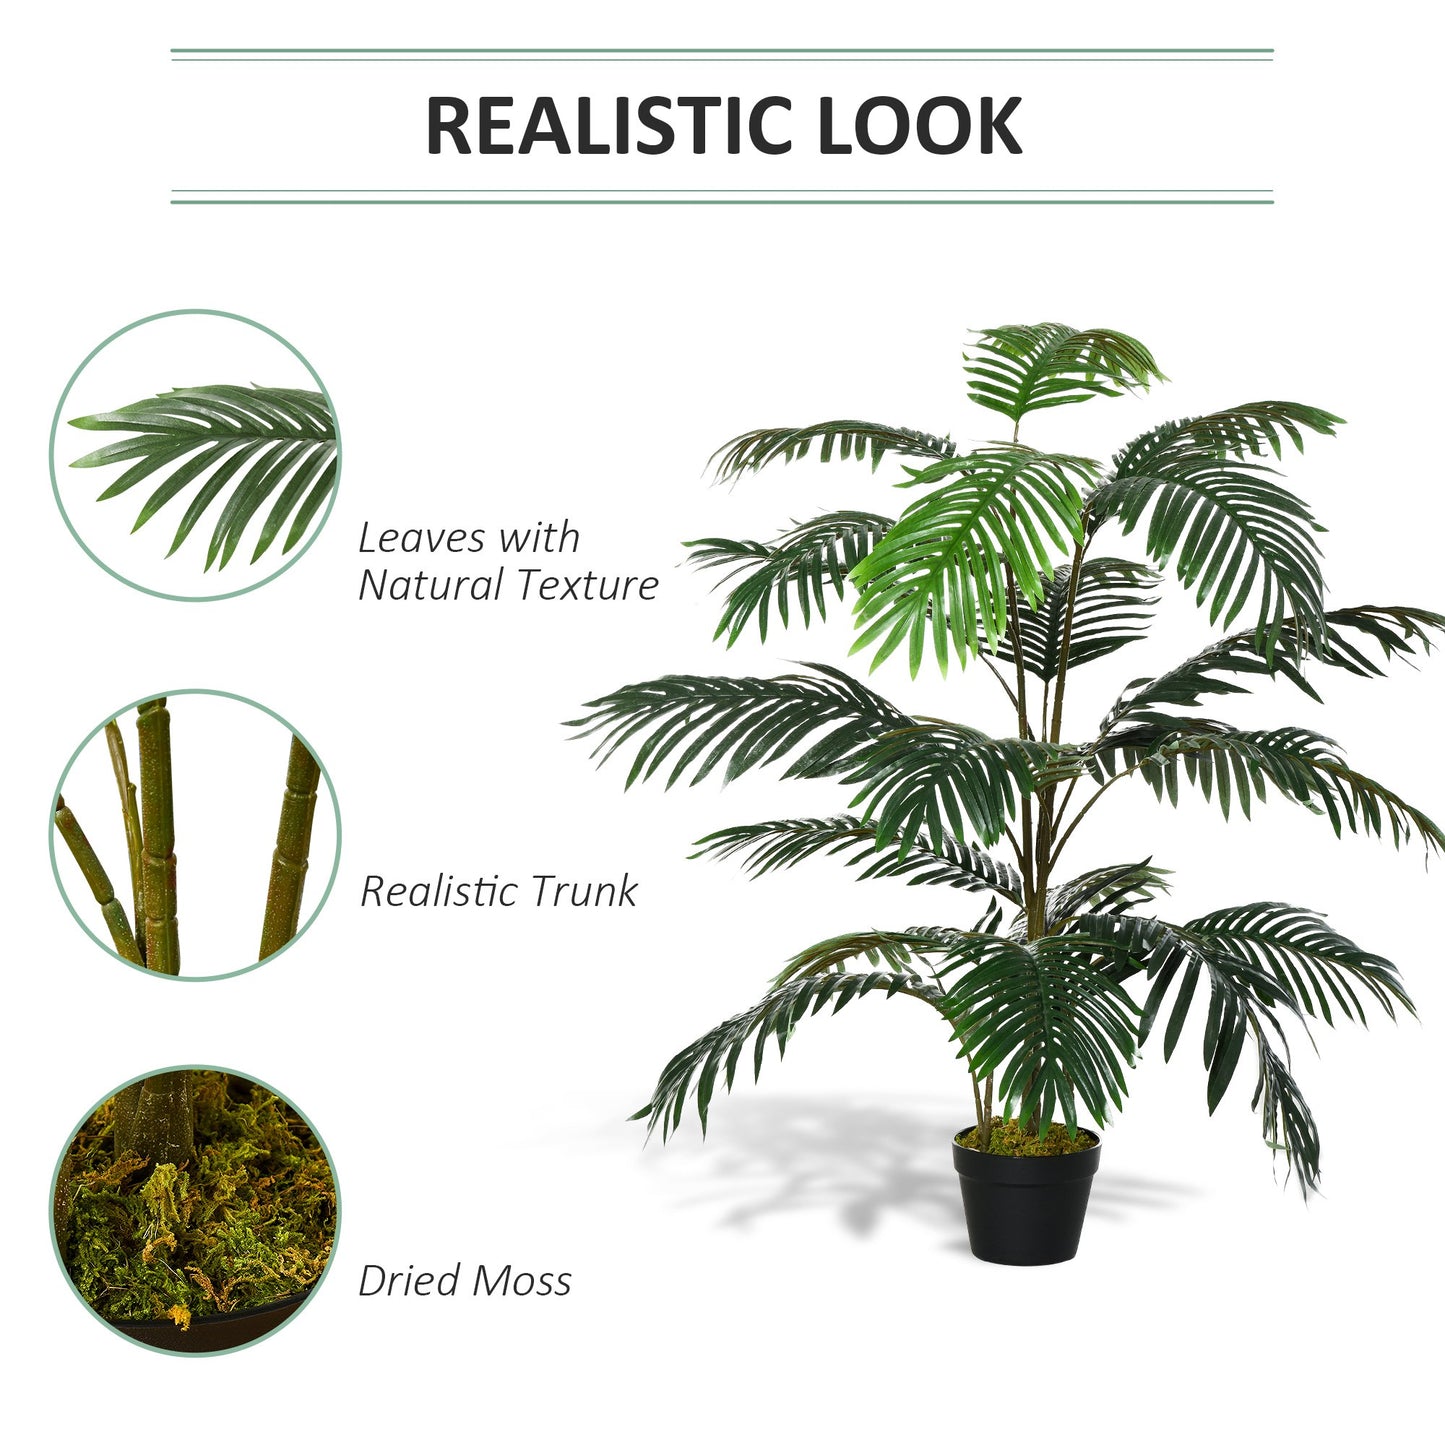 Outsunny 140cm/4.6FT Artificial Palm Plant Decorative Tree w/ 20 Leaves Nursery Pot Fake Plastic Indoor Outdoor Greenery Home Office Décor